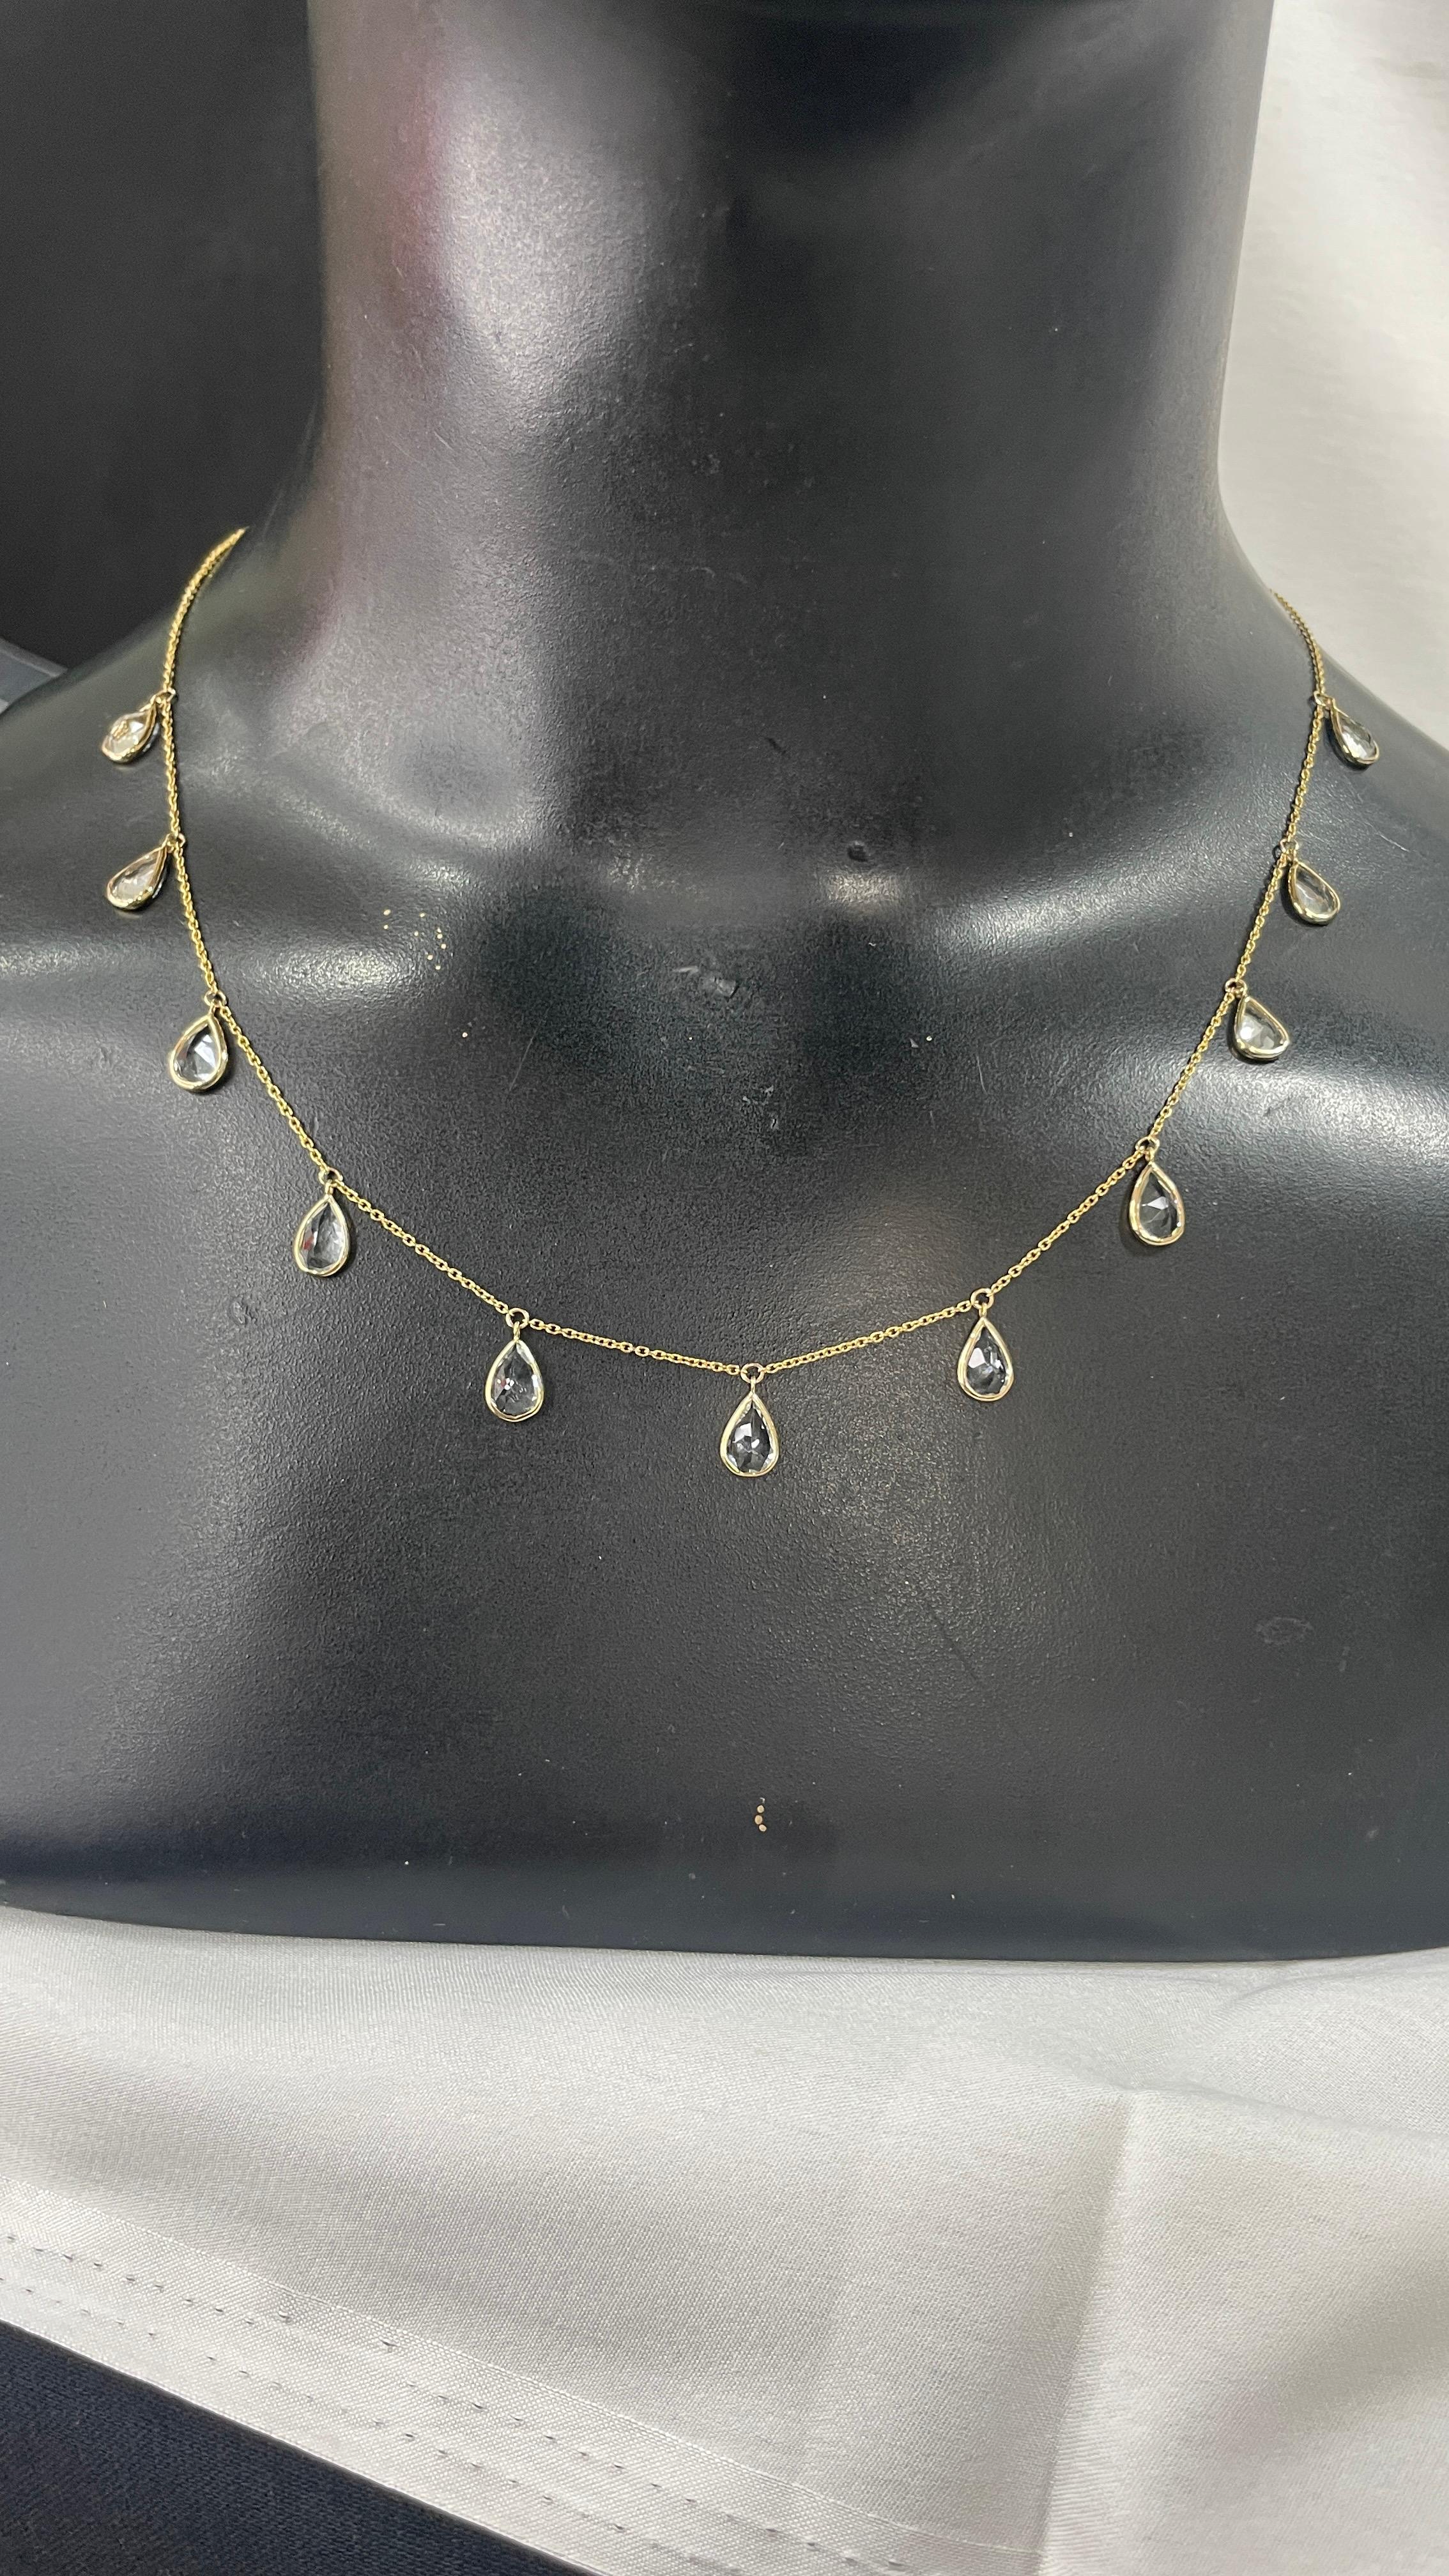 Crystal Necklace in 18K Gold studded with drop cut gemstone.
Accessorize your look with this elegant crystal drop necklace. This stunning piece of jewelry instantly elevates a casual look or dressy outfit. Comfortable and easy to wear, it is just as